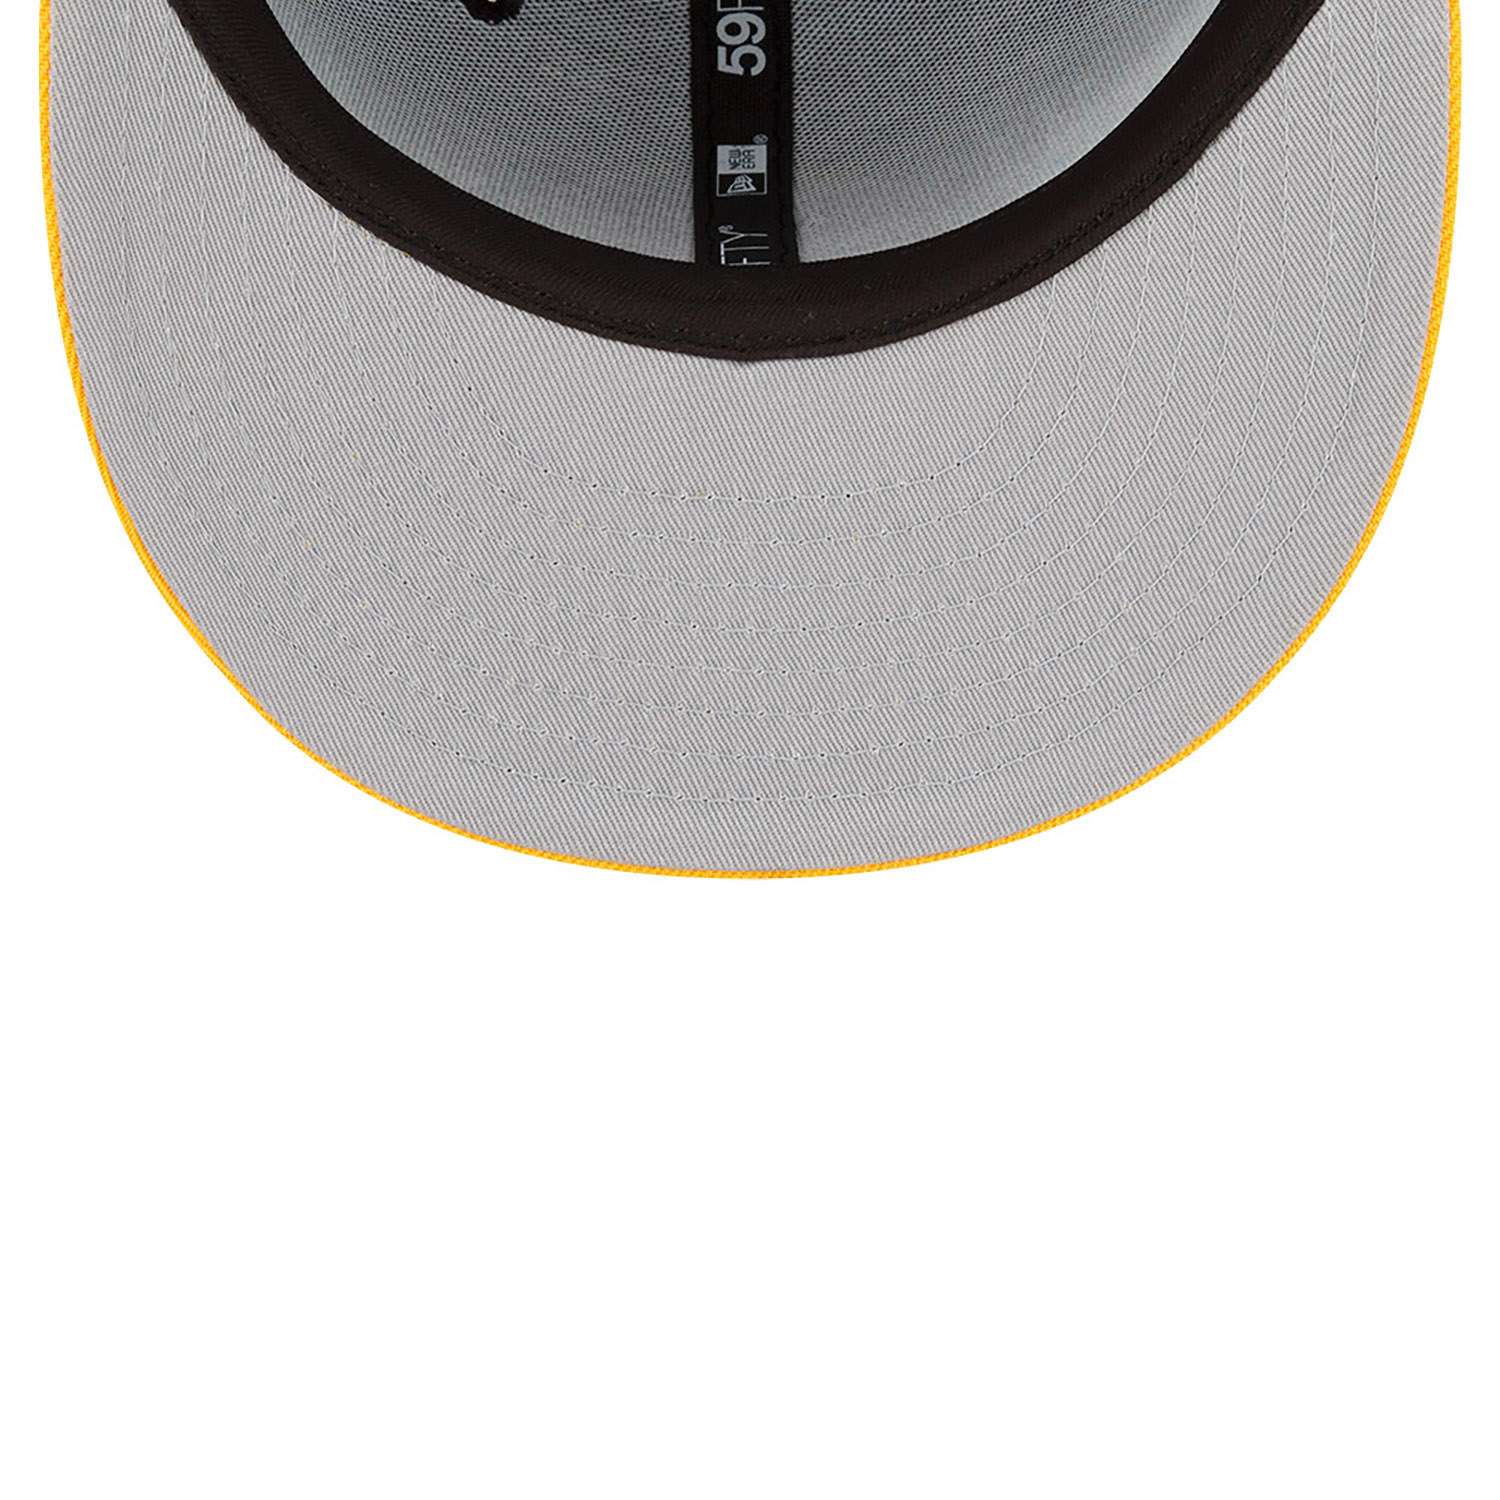 59Fifty Round Logo Steelers Cap by New Era --> Shop Hats, Beanies